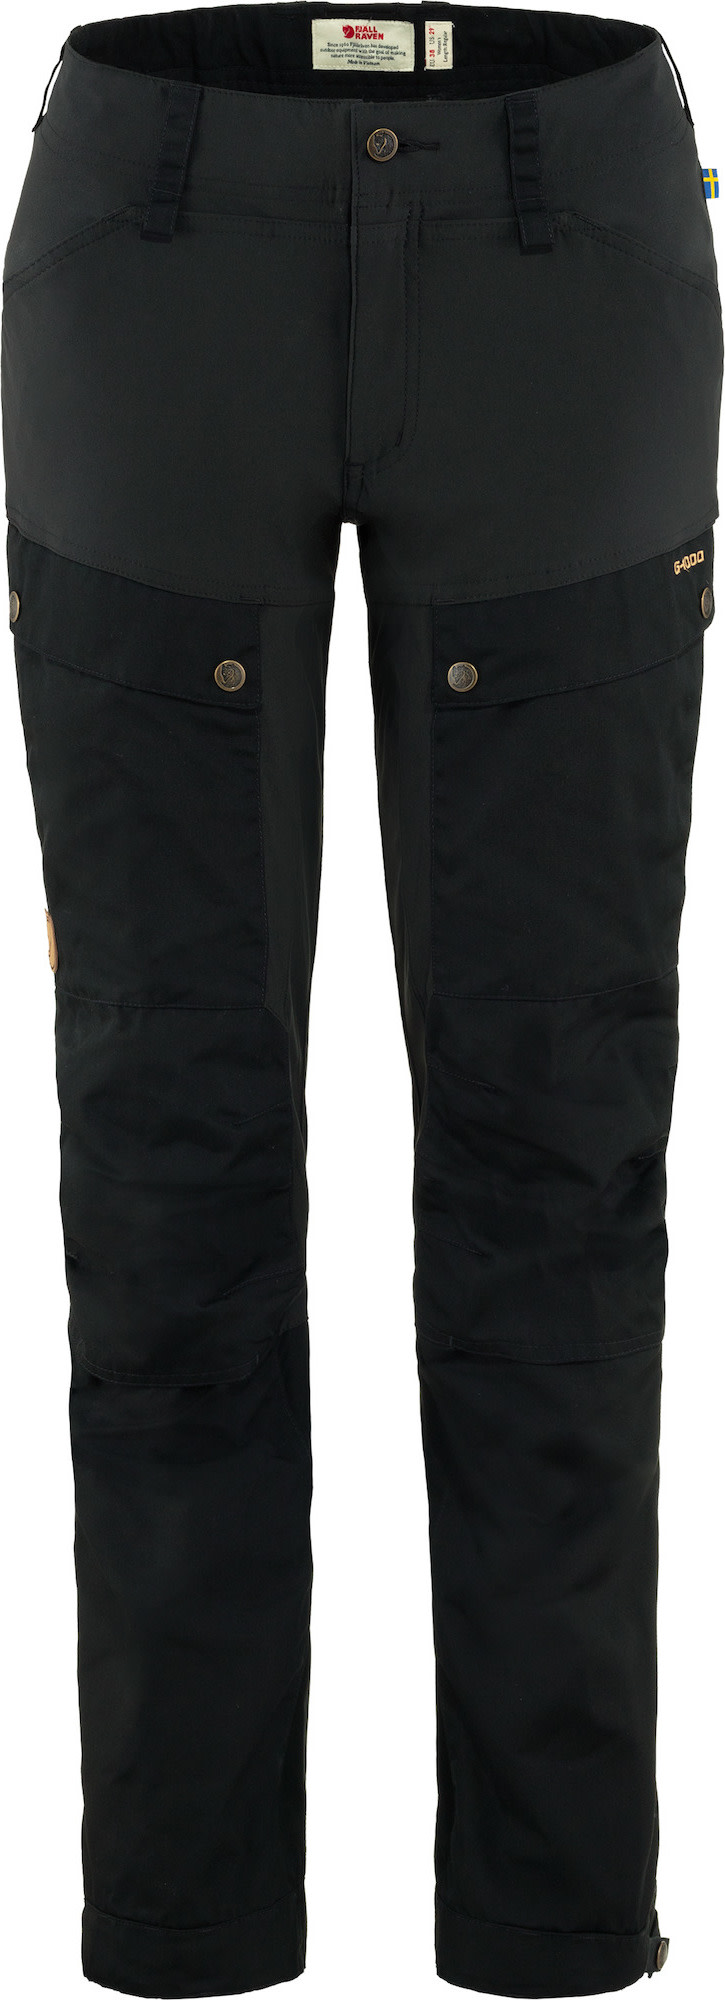 Buy Women's Keb Trousers Black here | Outnorth